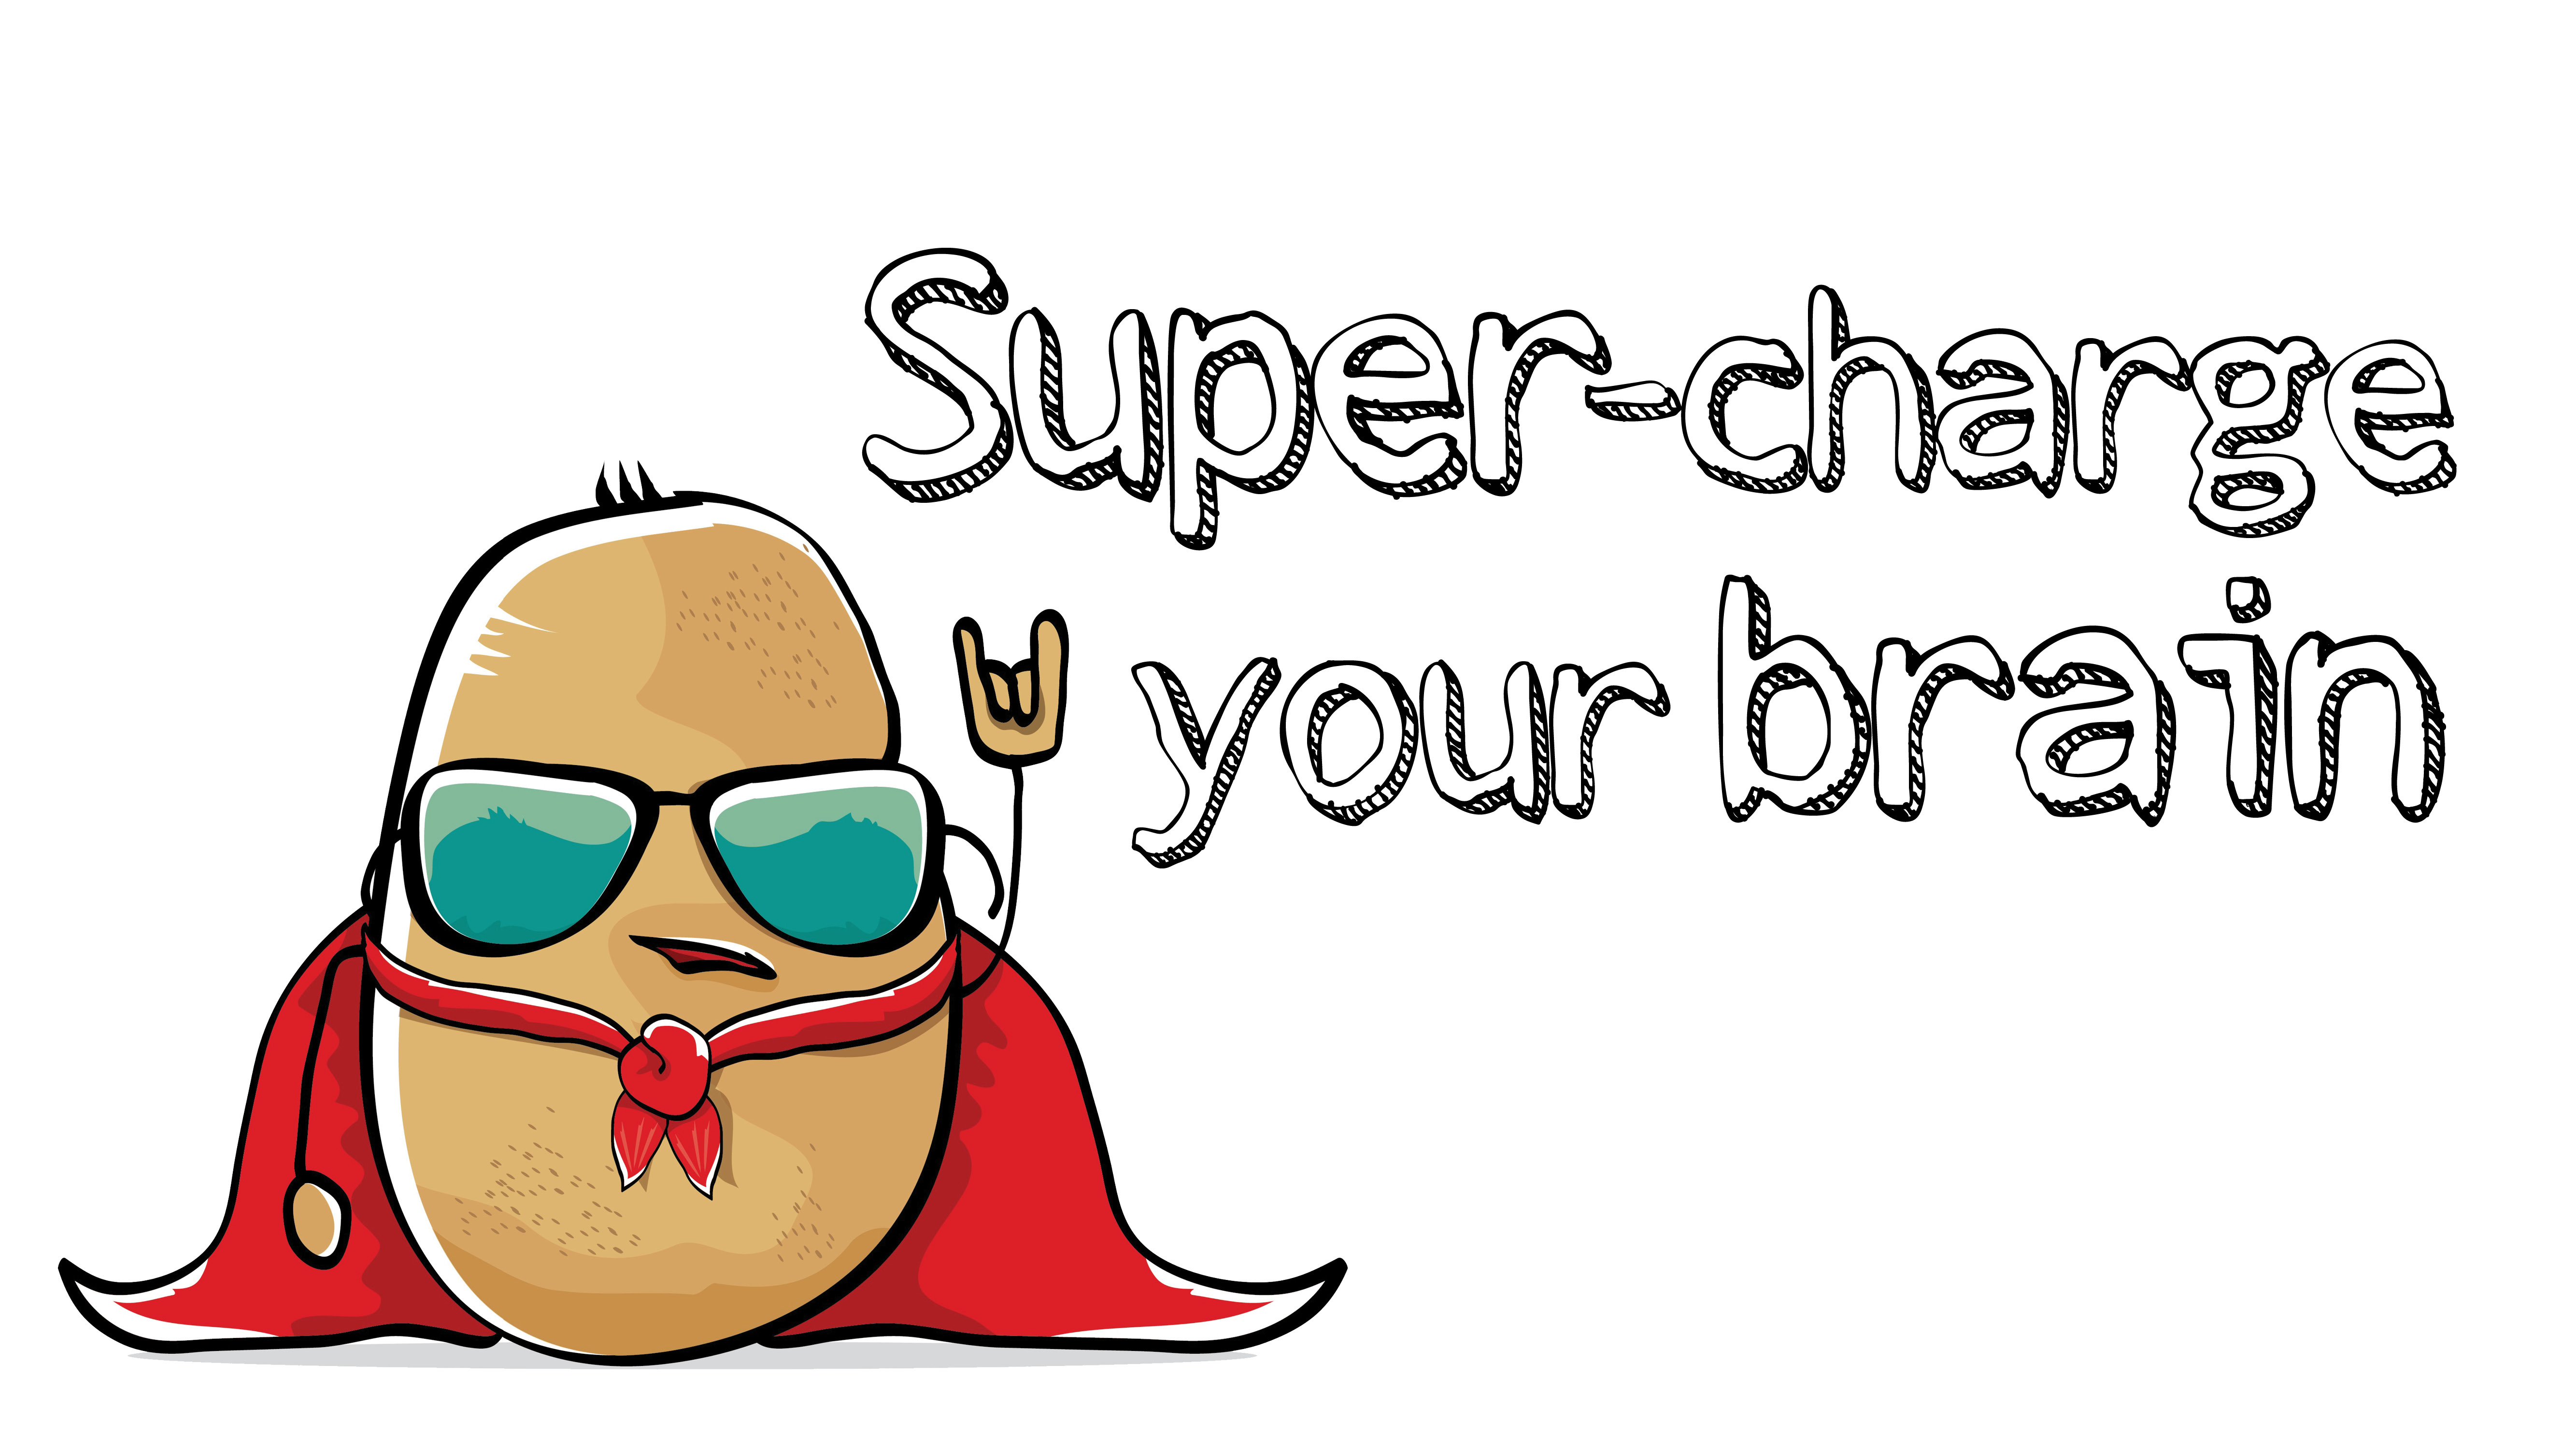 Super-charge your brain Apr 6